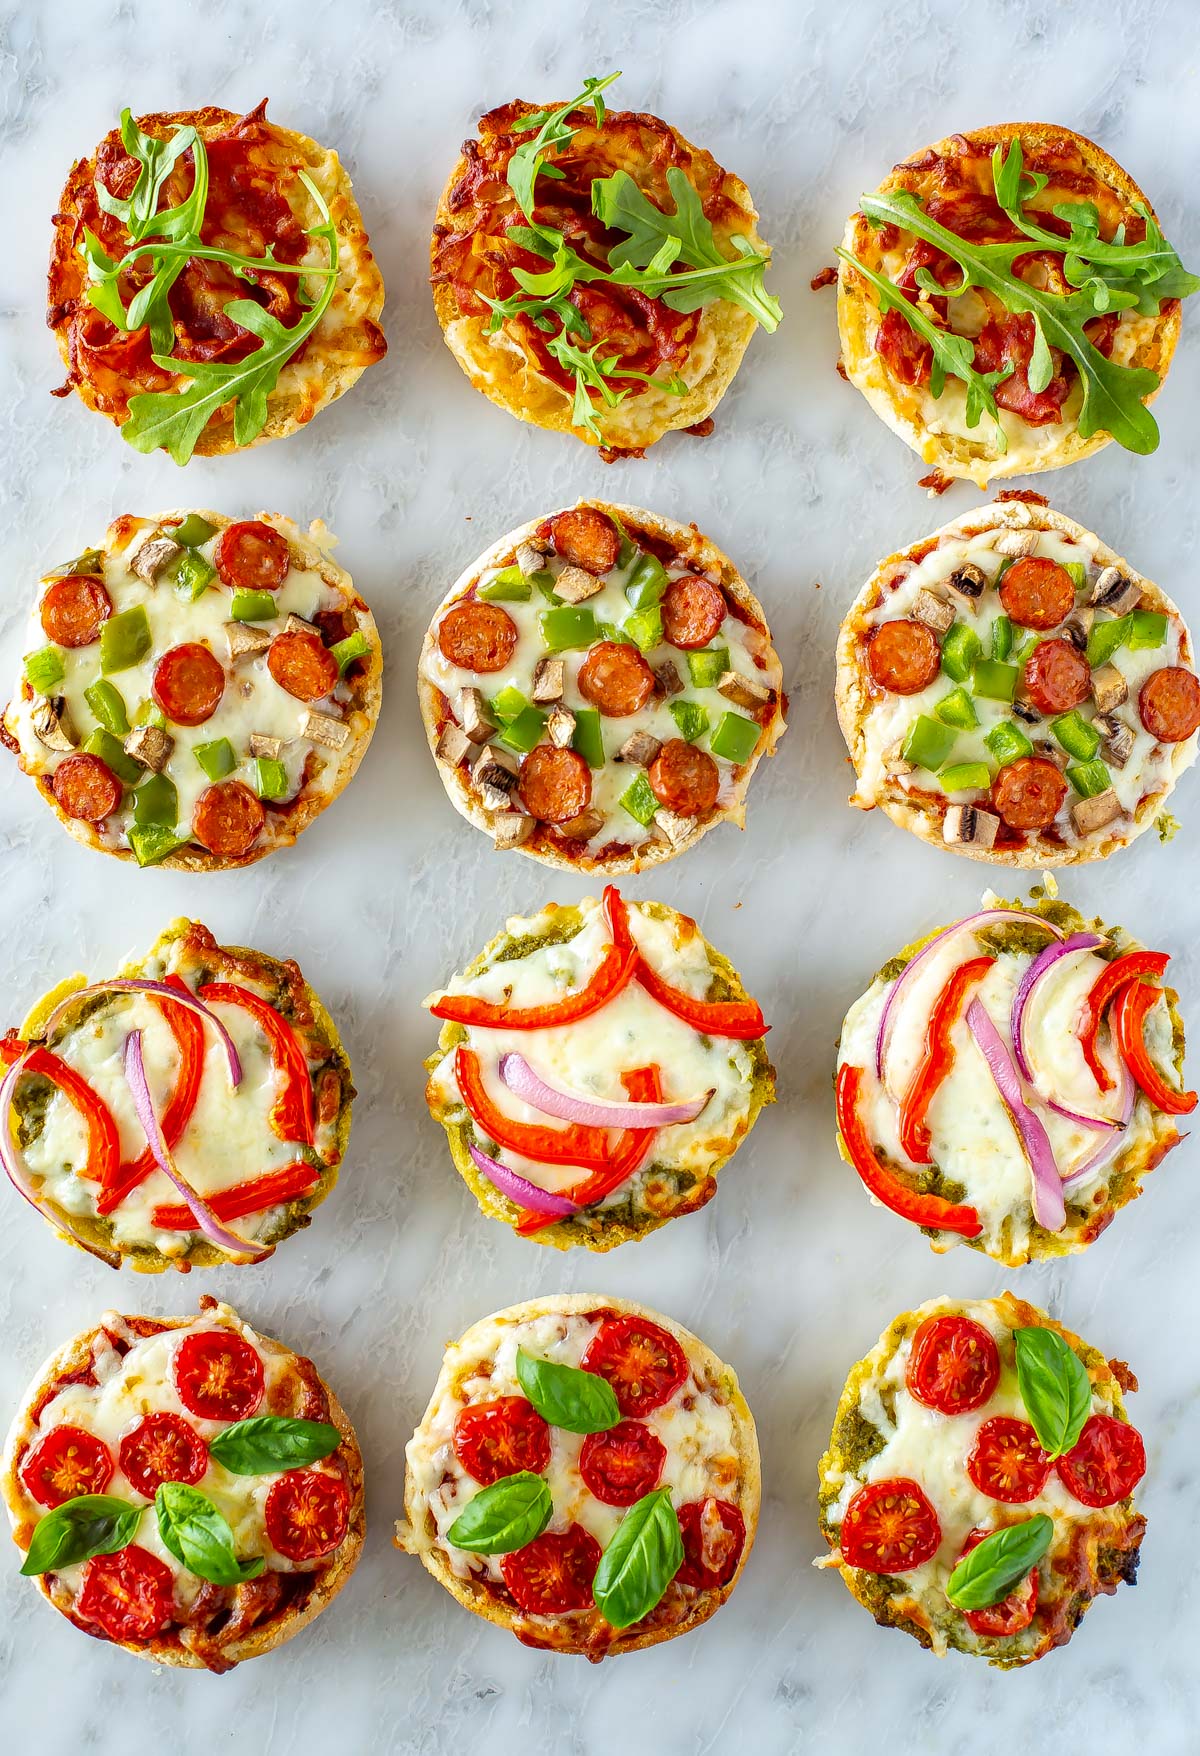 12 different english muffin pizzas on a marble slab.